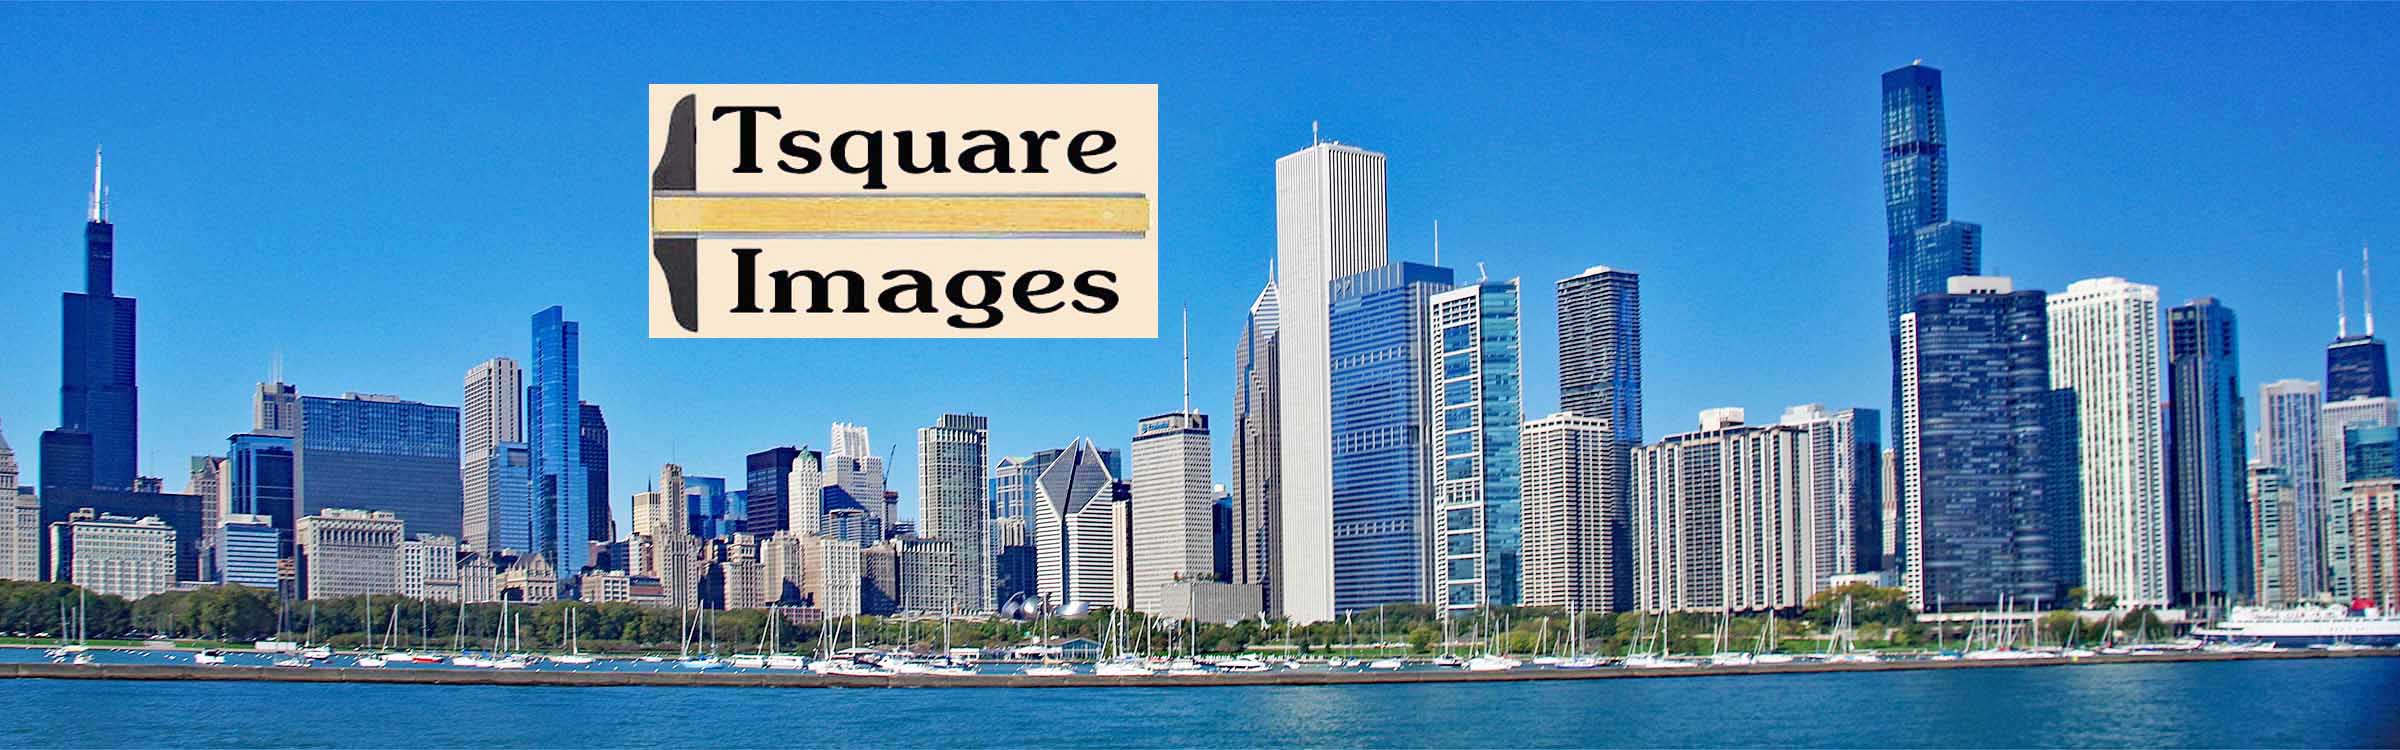 Tsquare Images banner